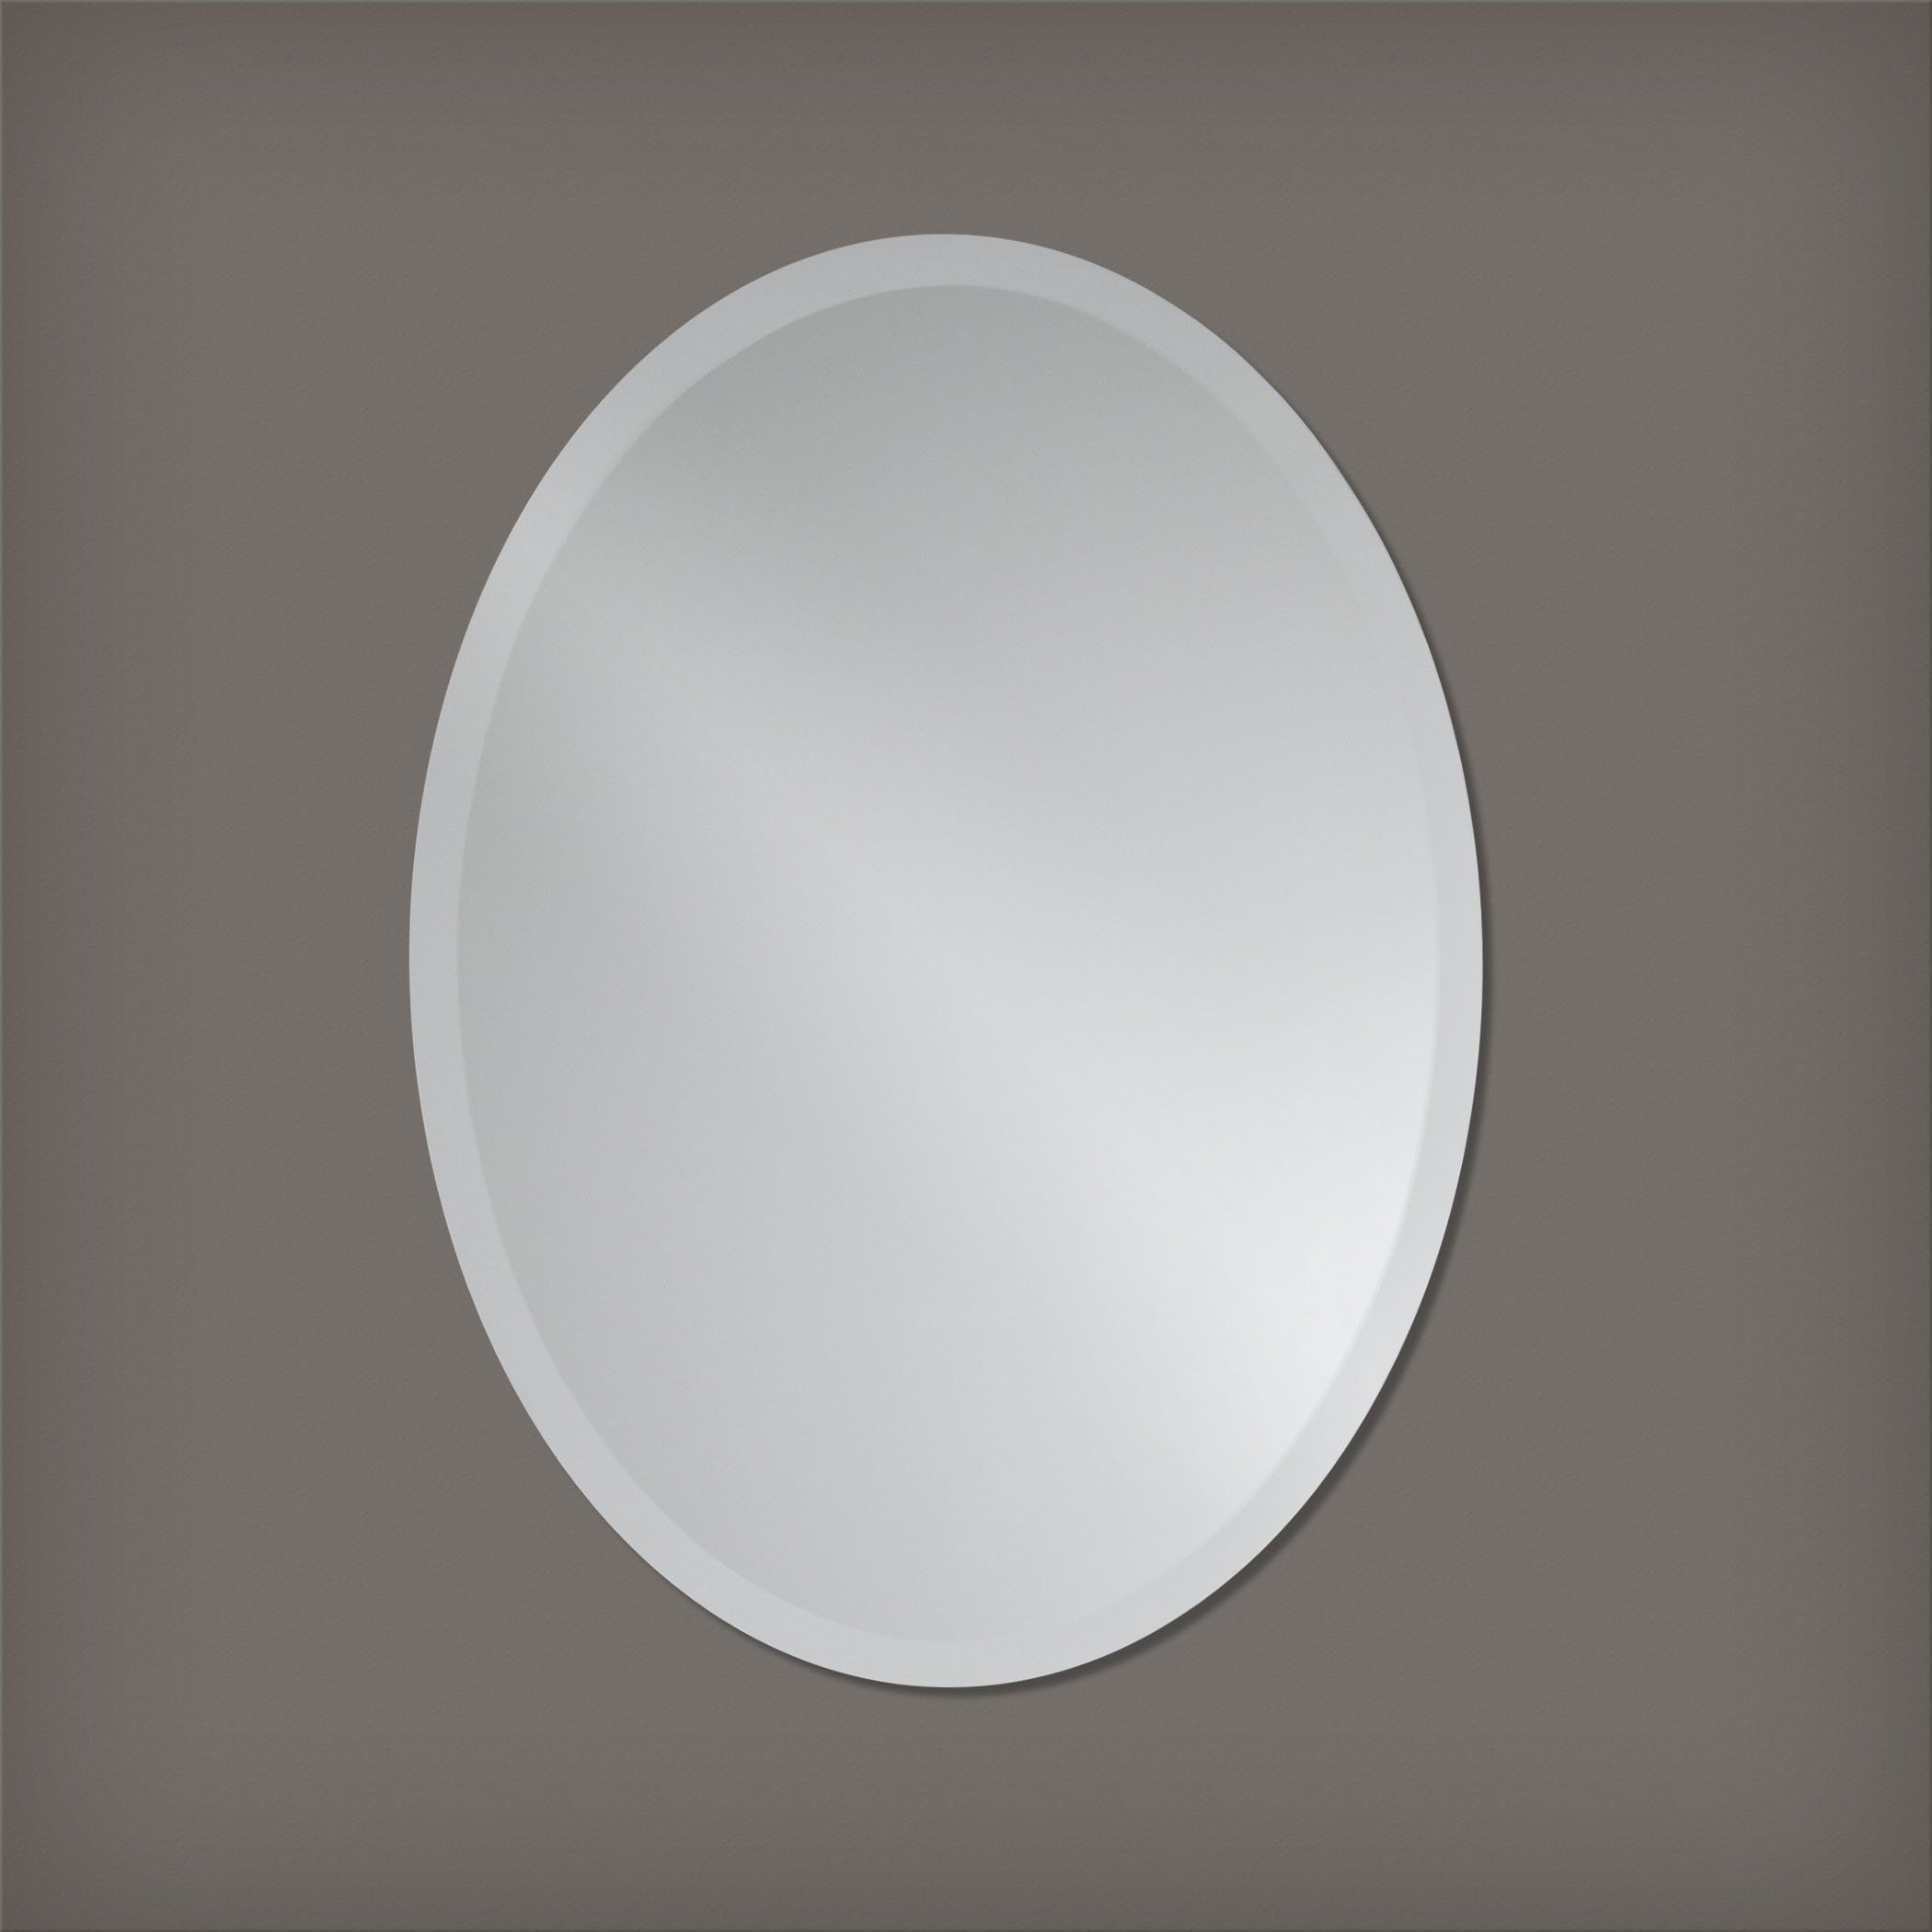 Small Frameless Beveled Oval Wall Mirror Bathroom Vanity Bedroom Mirror With Regard To Oval Frameless Led Wall Mirrors (View 13 of 15)